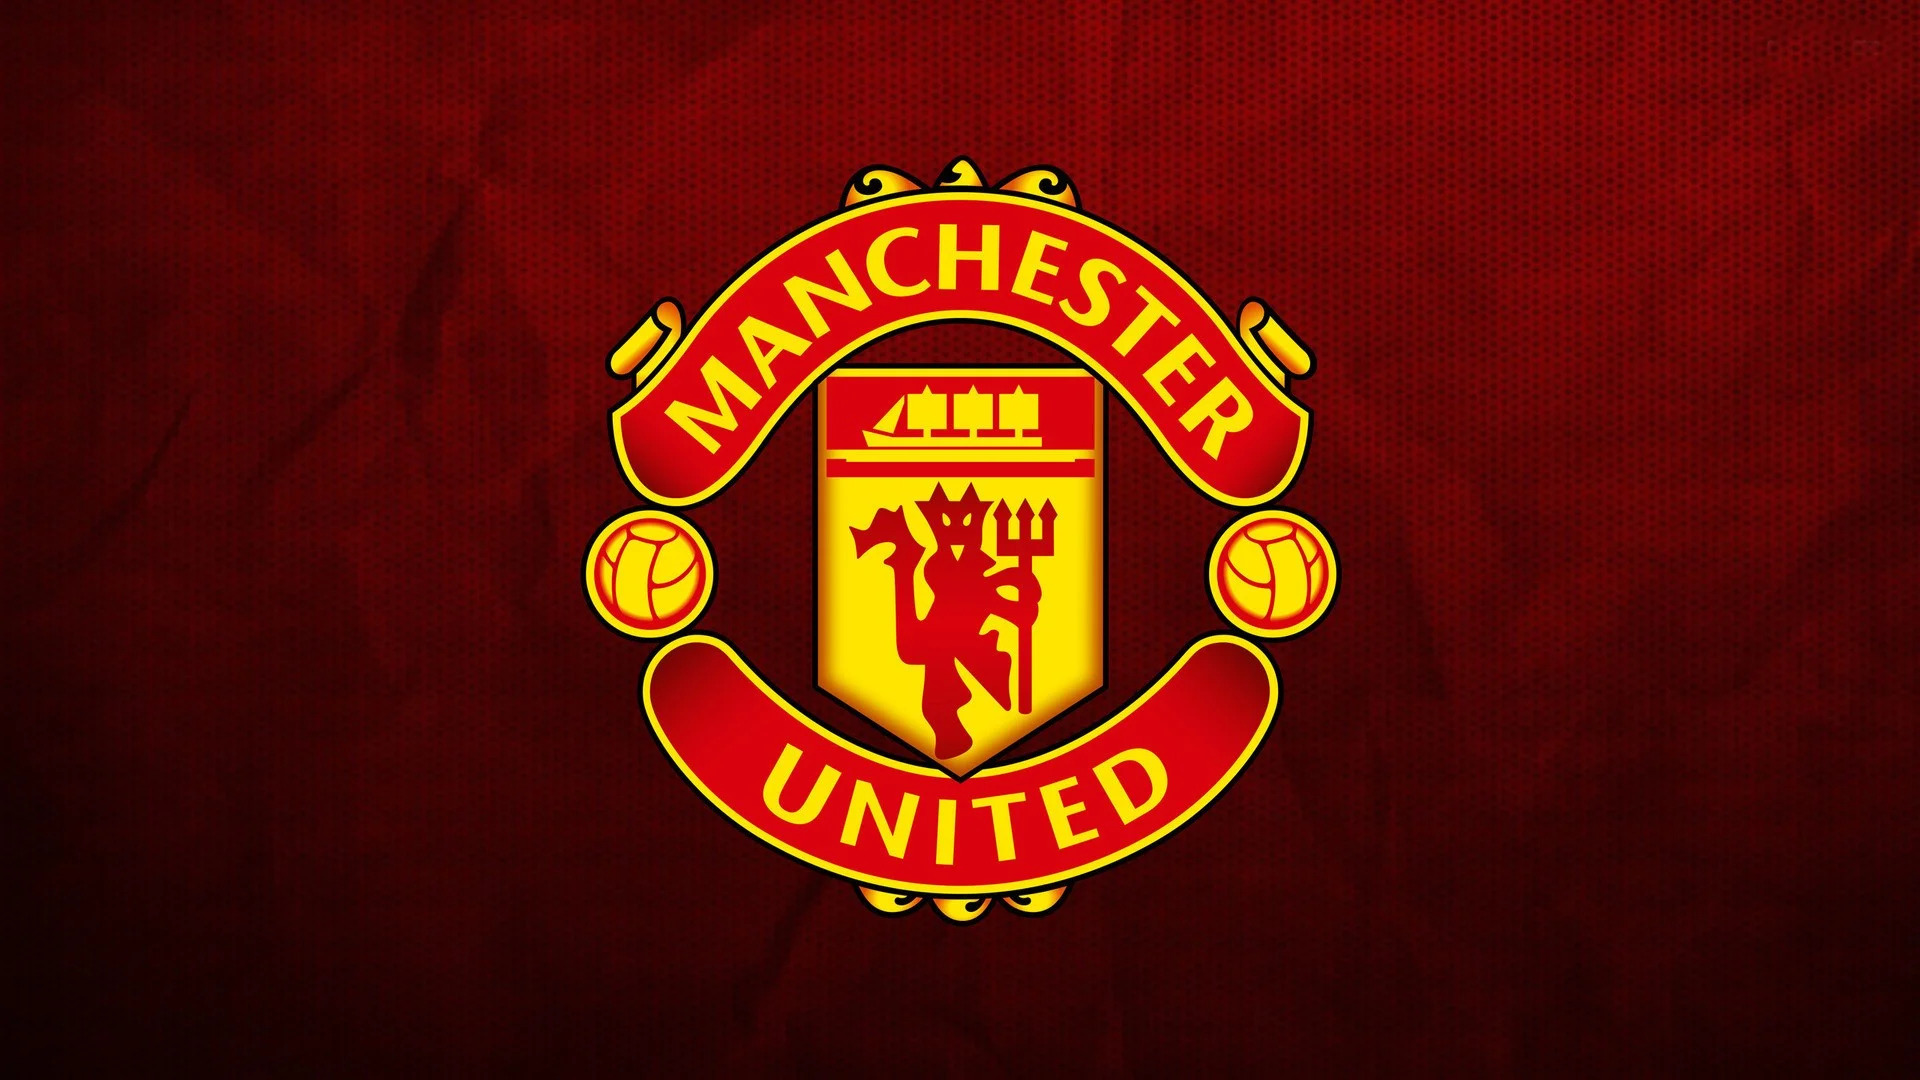 Manchester United Wallpaper for Mobile and PC